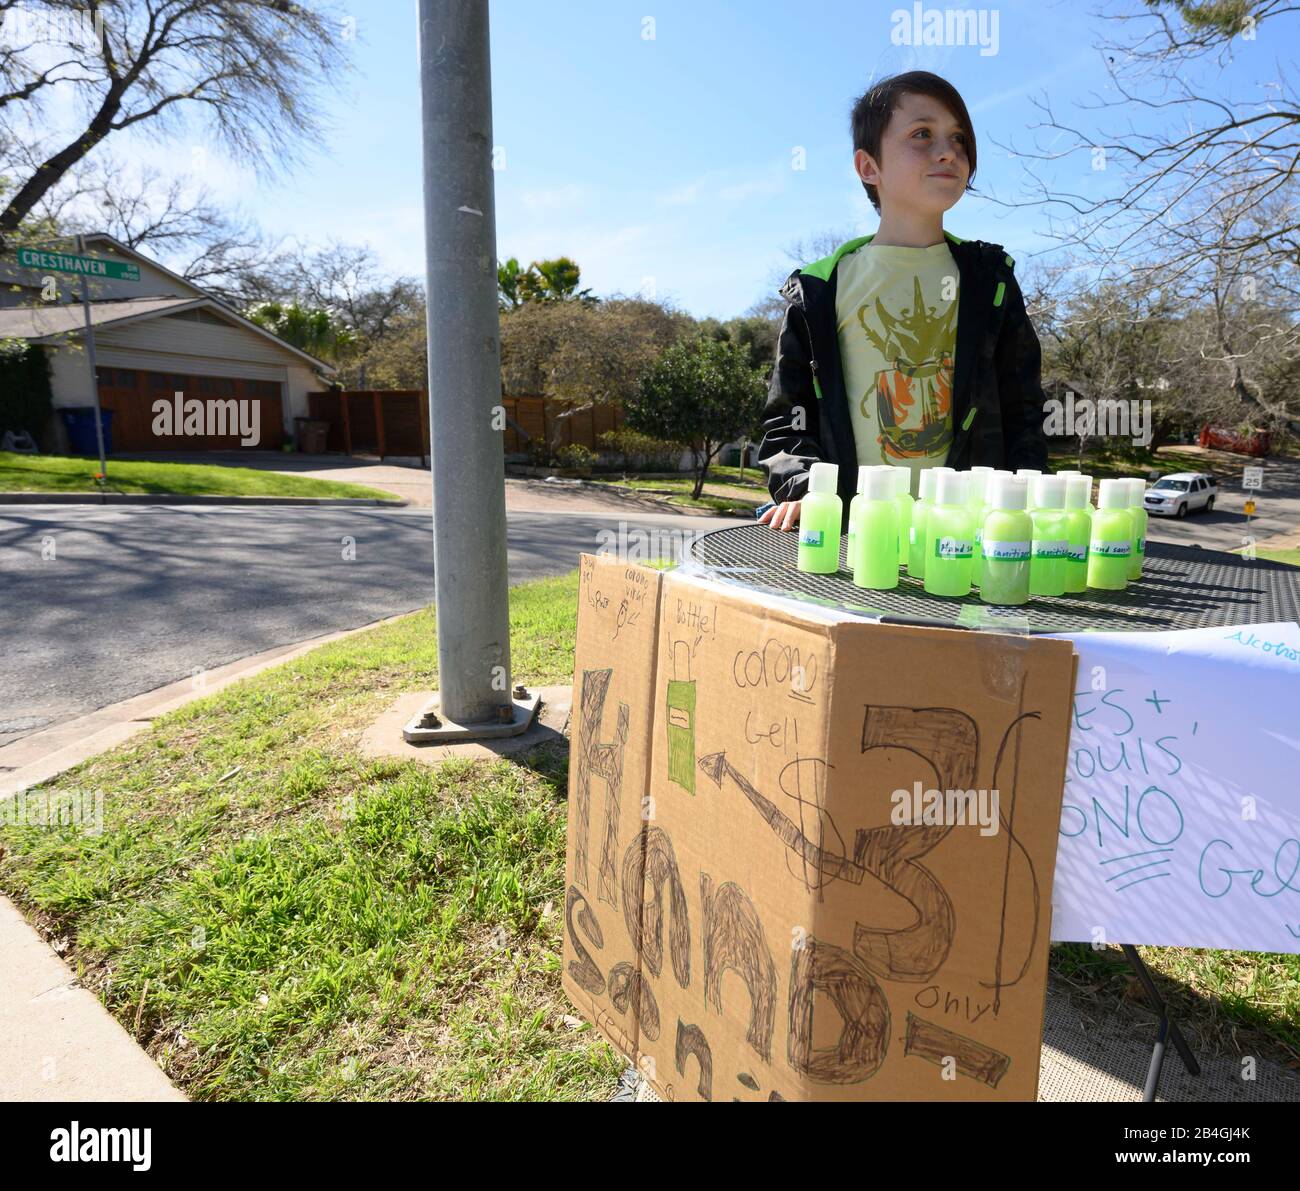 Hand sanitizer stand replaces lemonade stand as entrepreneur Miles Miller sells homemade hand sanitizer to help combat coronavirus at $3 a bottle in his Austin, Texas, neighborhood after school. Stock Photo